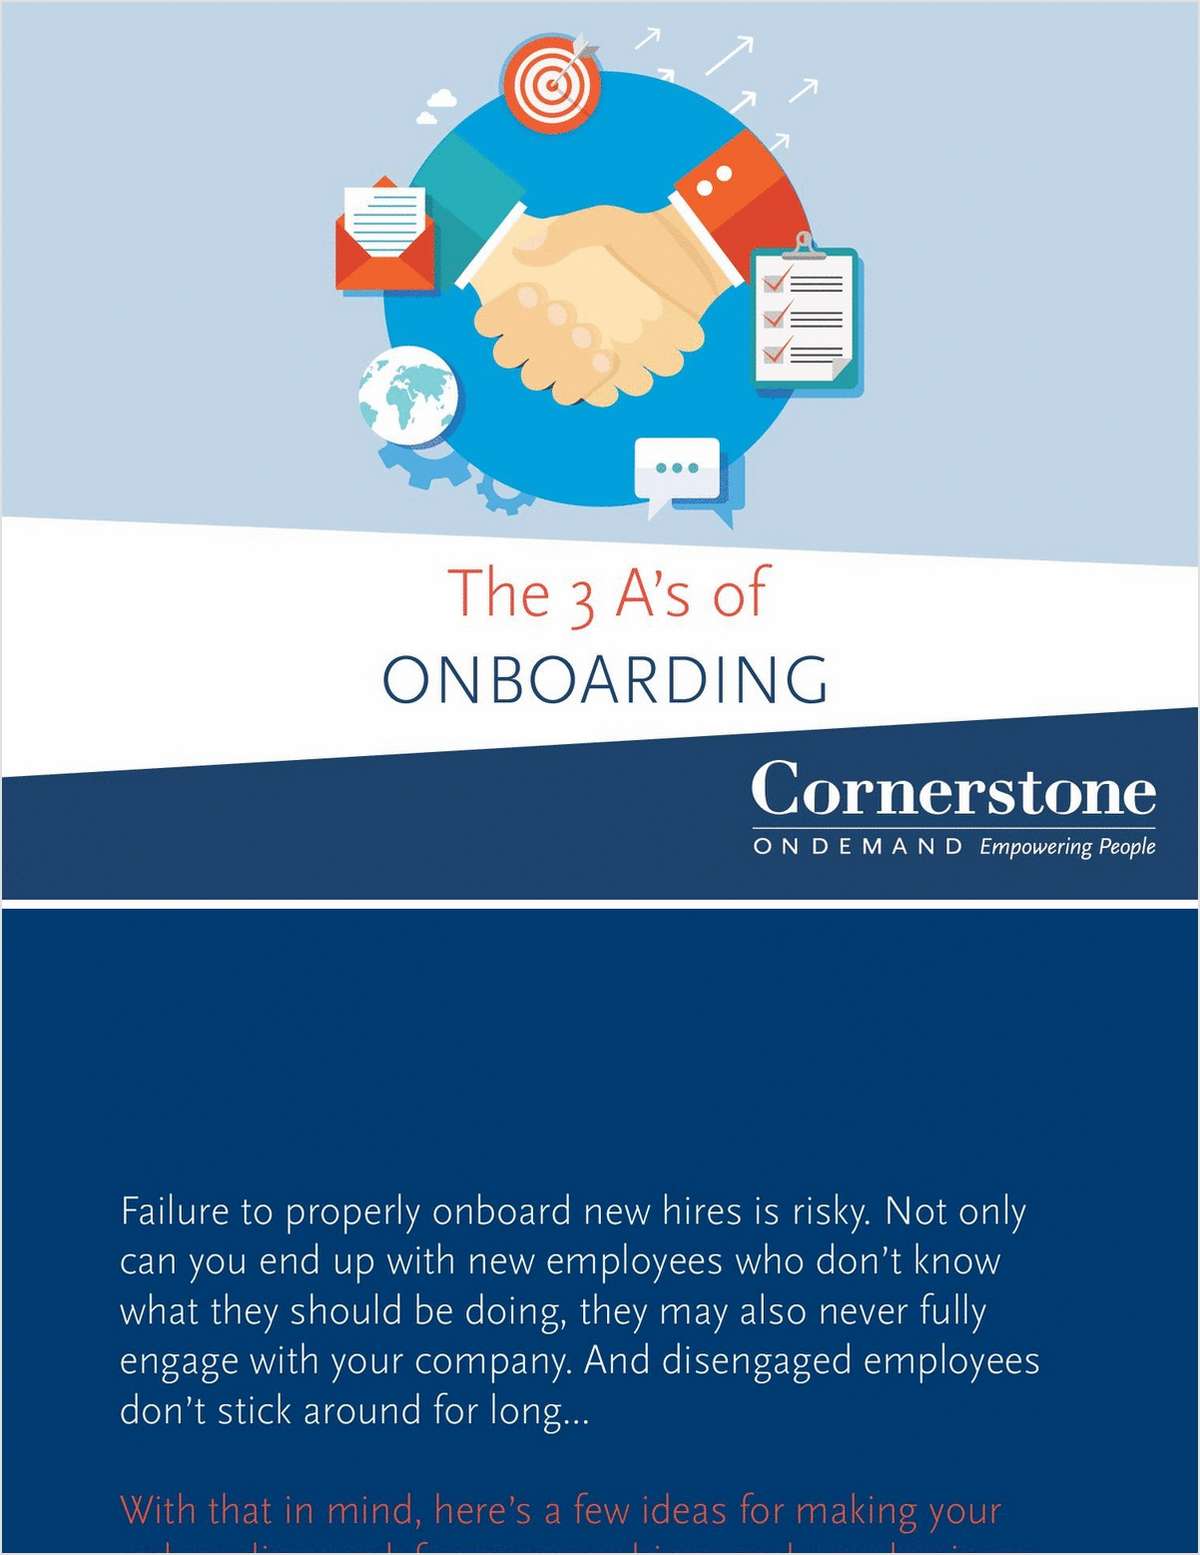 The 3 A's of Onboarding